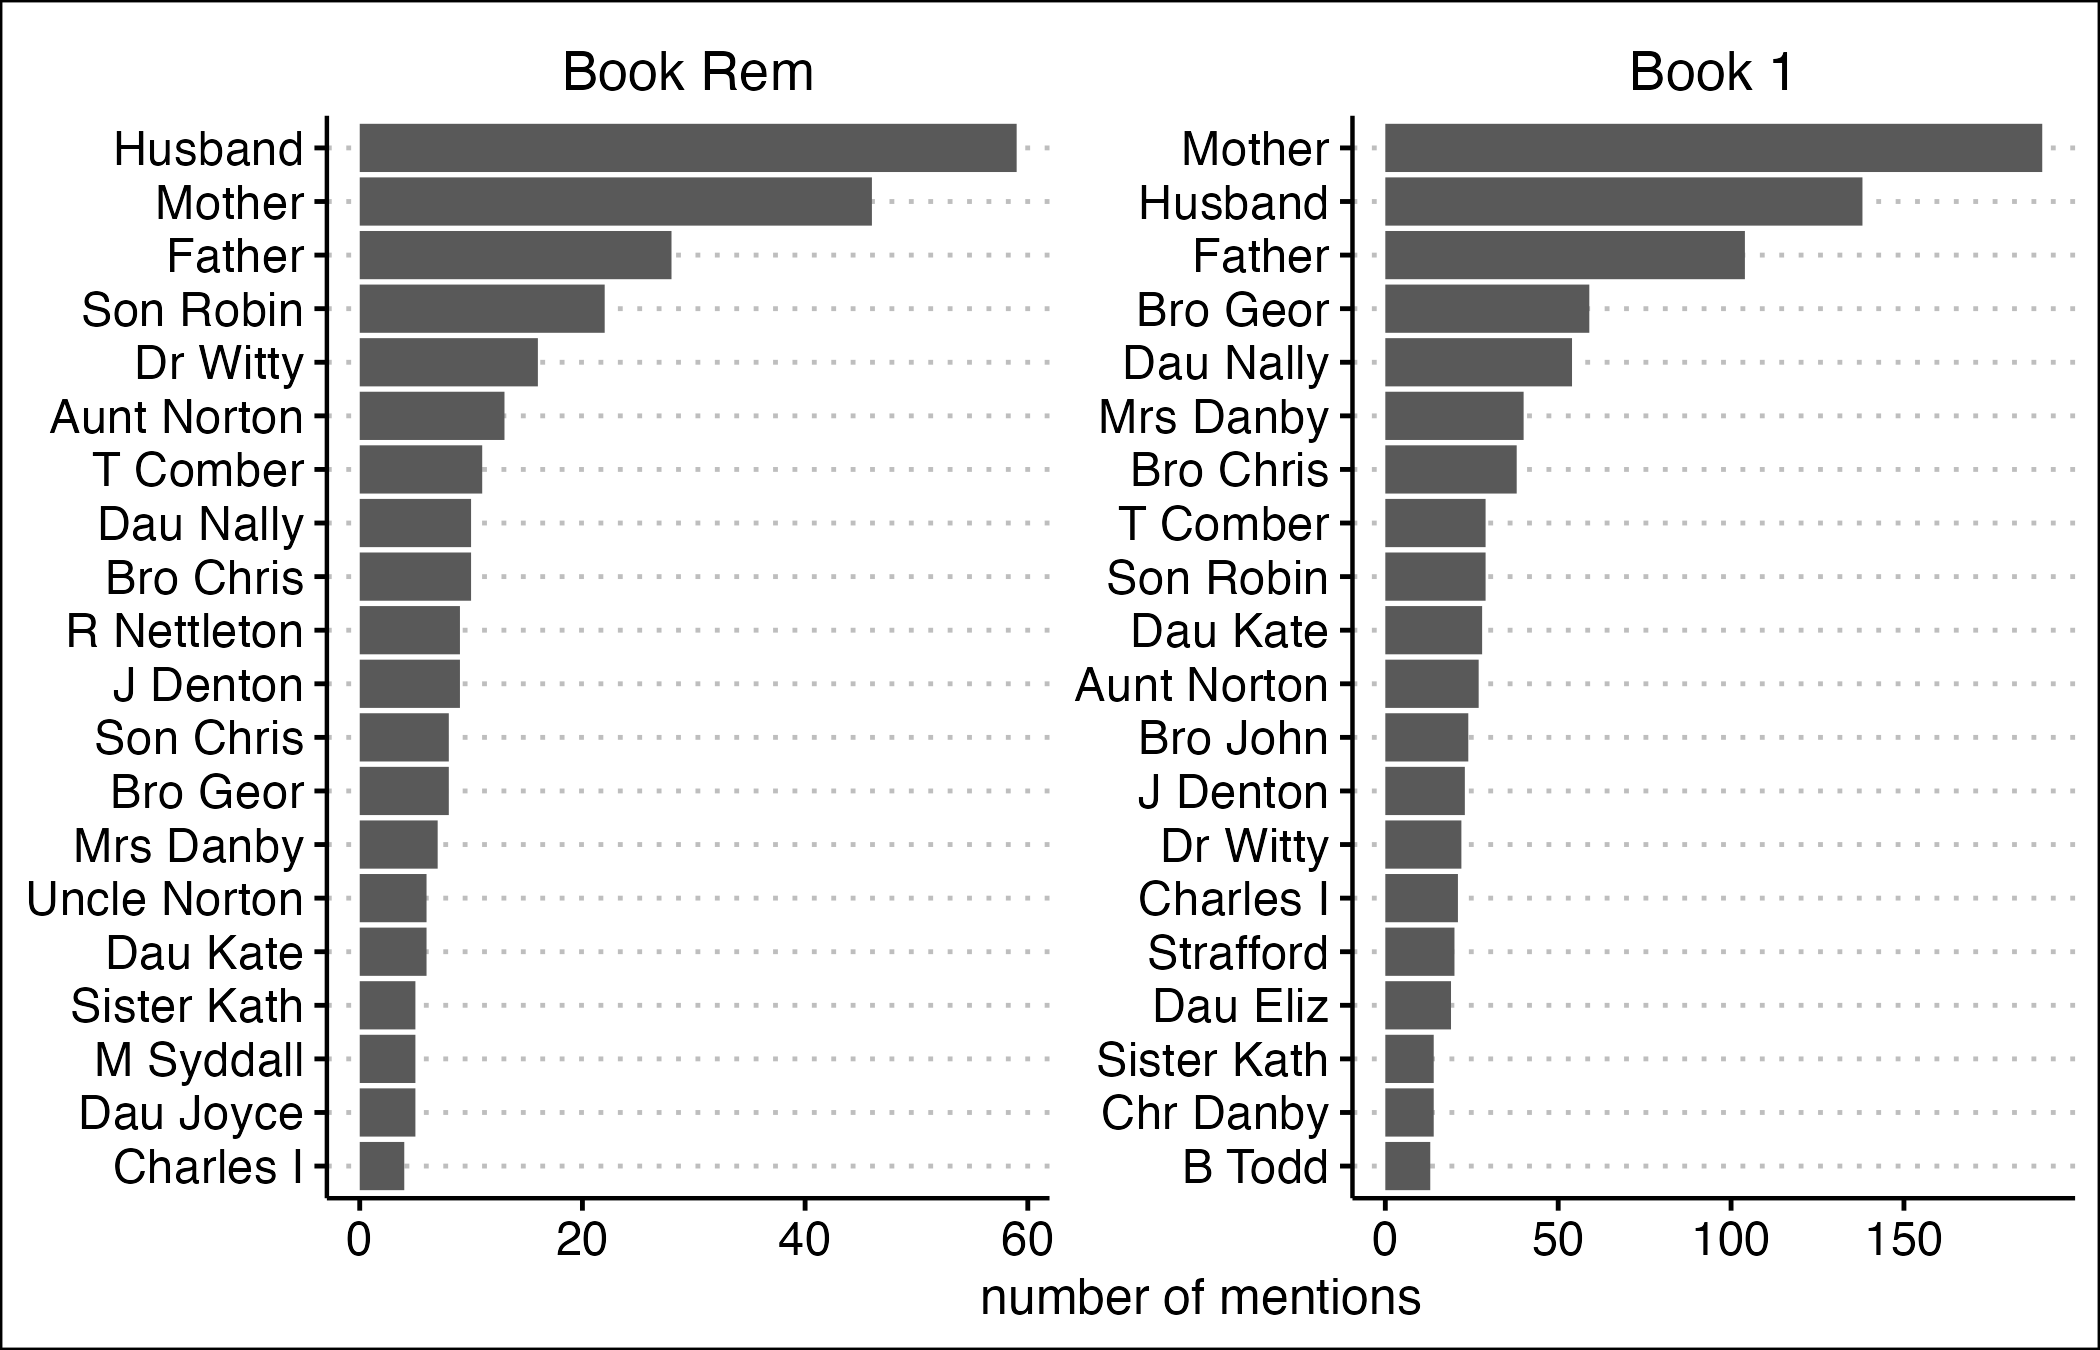 Side by side bar charts of the 20 most frequently
mentioned people in two of Alice Thornton's Books. Her husband, mother
and father are the top three in each book, but after that there are several differences between books.